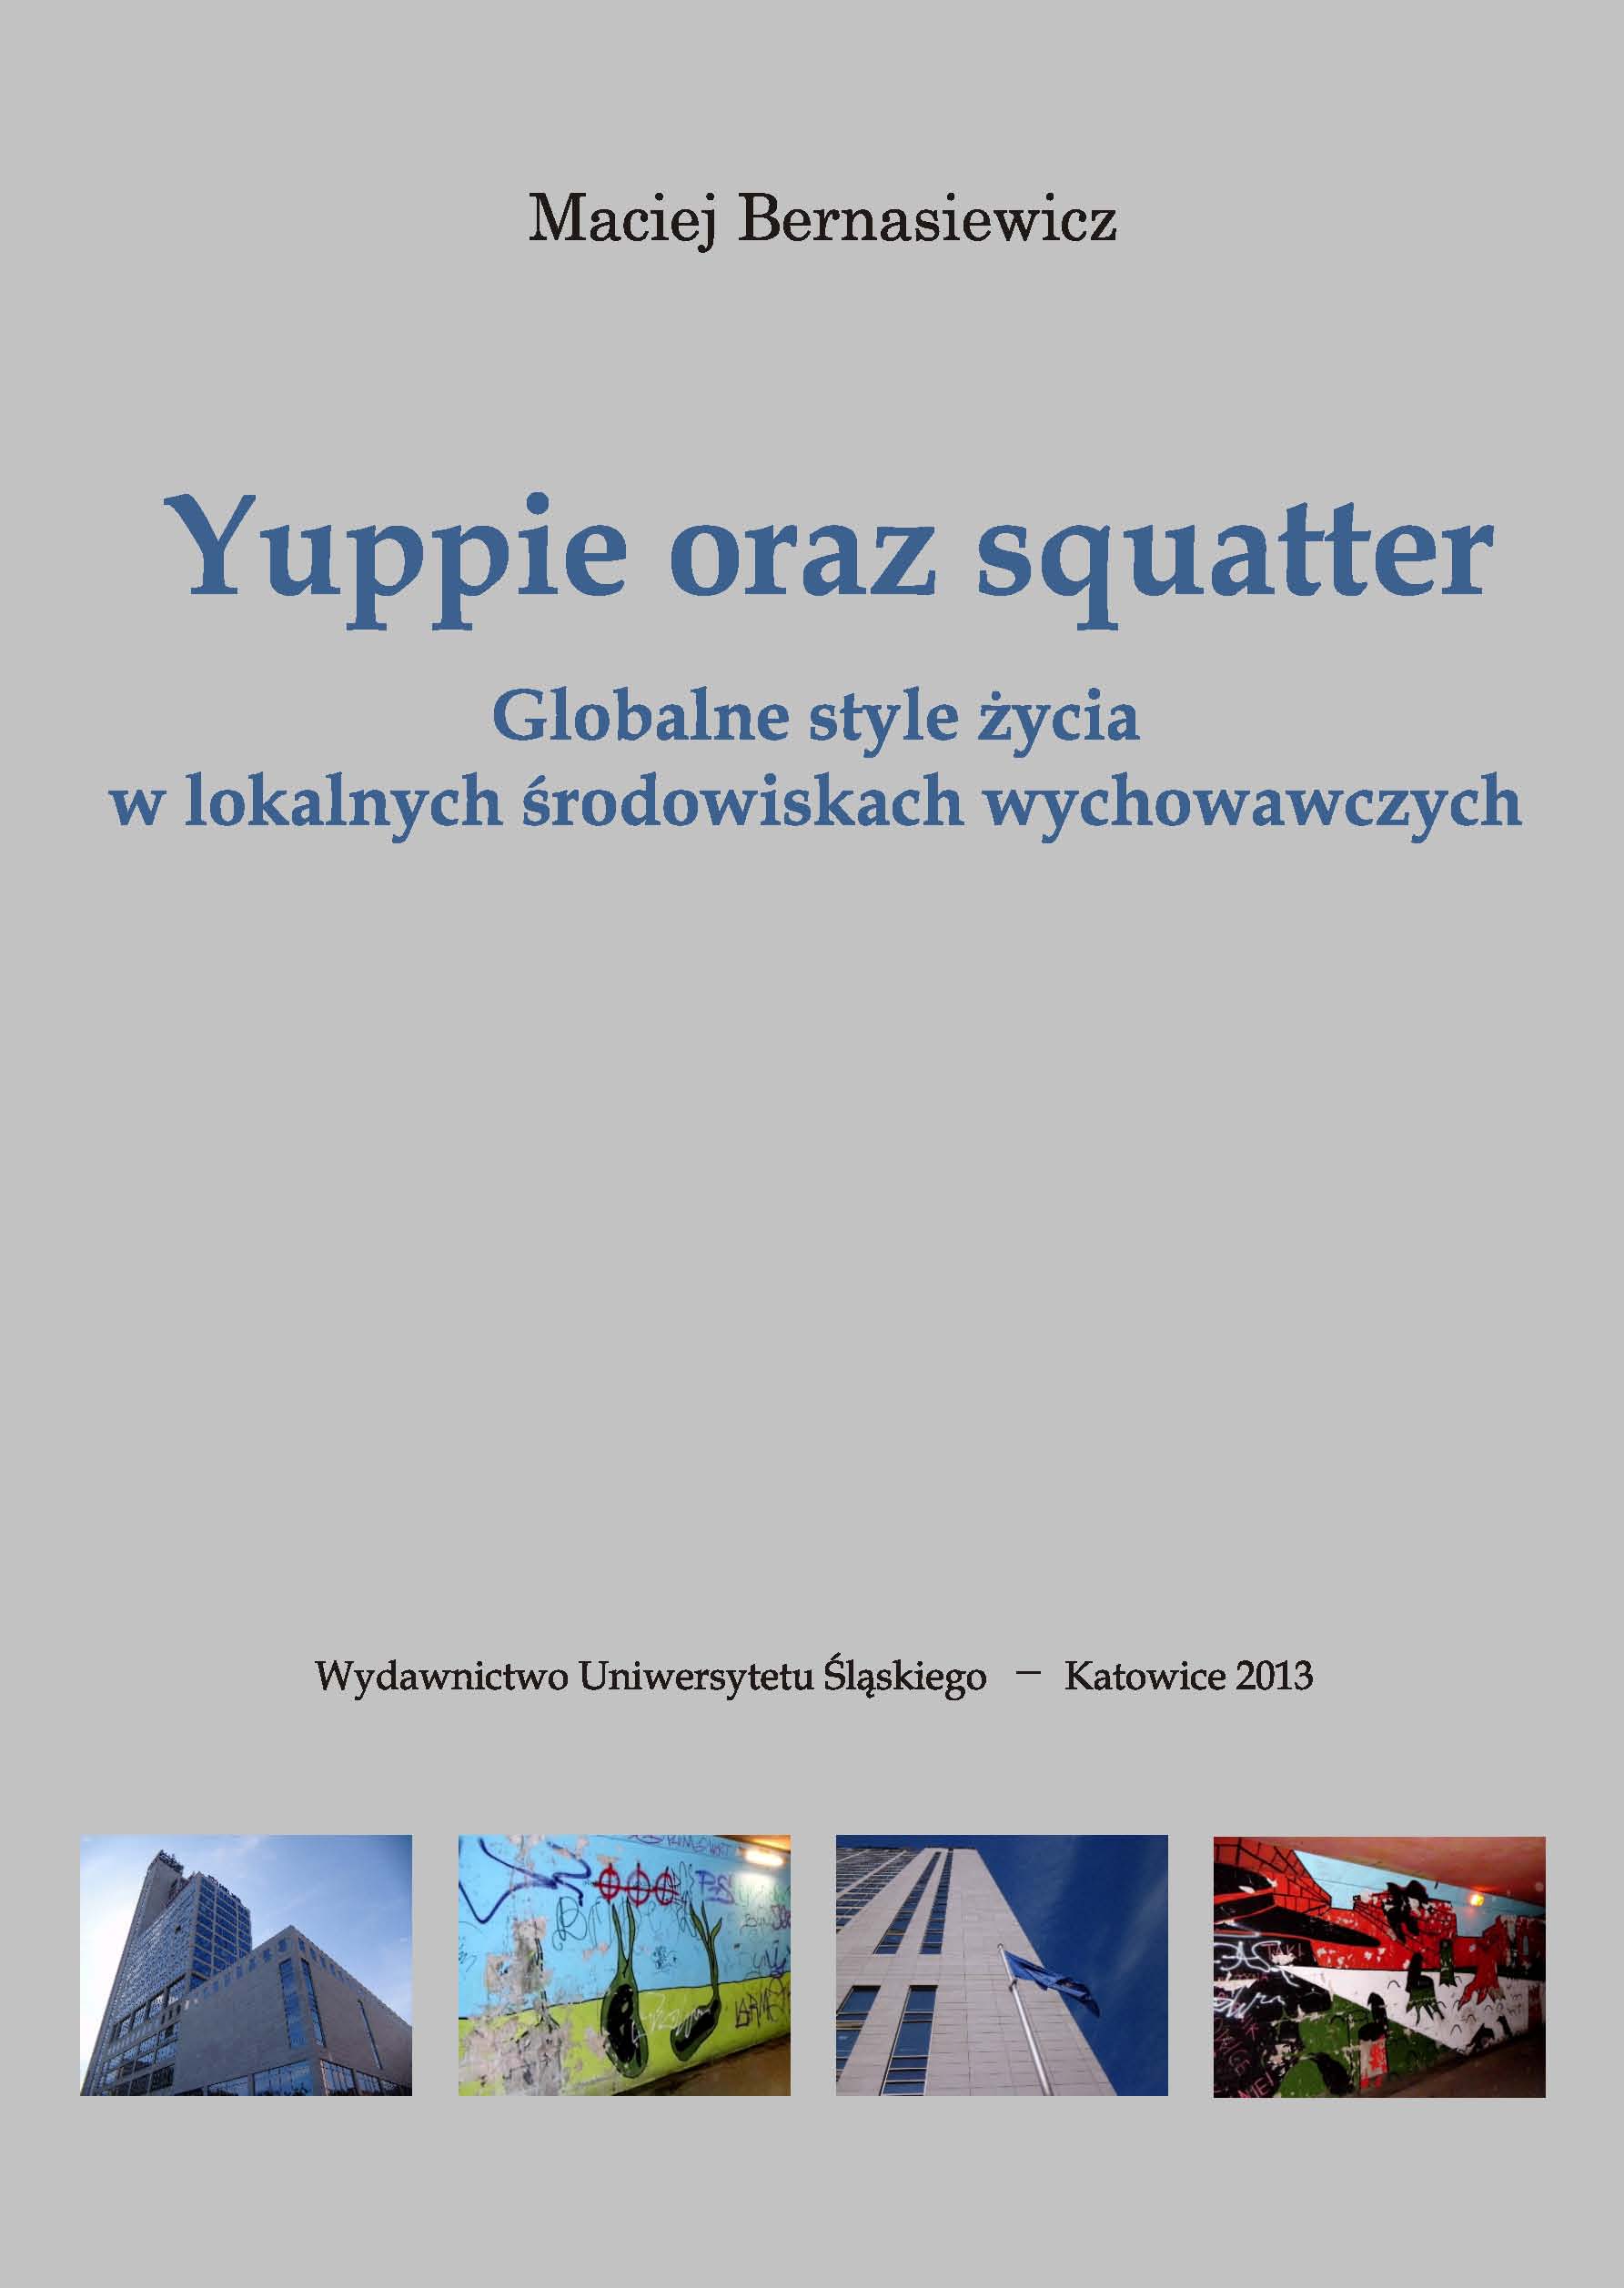 A yuppie and a squatter. Global lifestyles in local educational environments